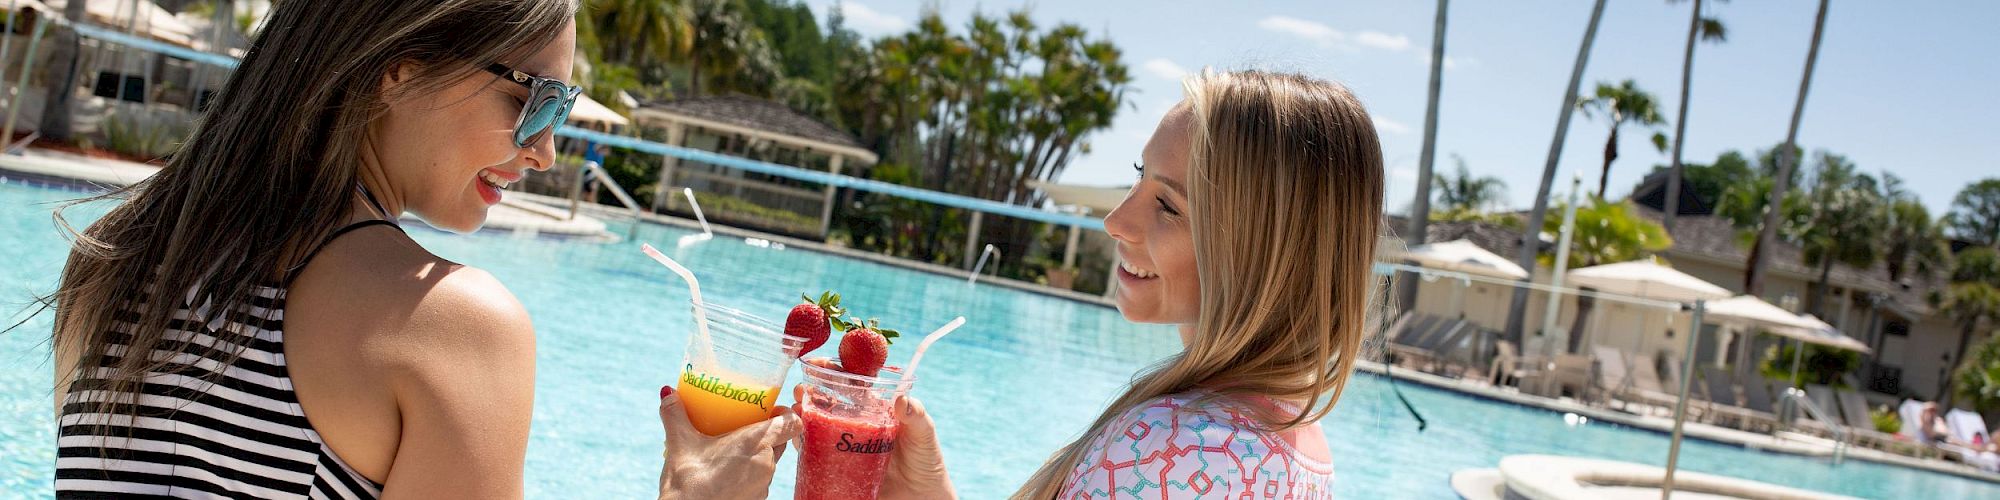 Two women clink their colorful drinks while standing at a sunny outdoor pool, surrounded by palm trees and resort facilities.